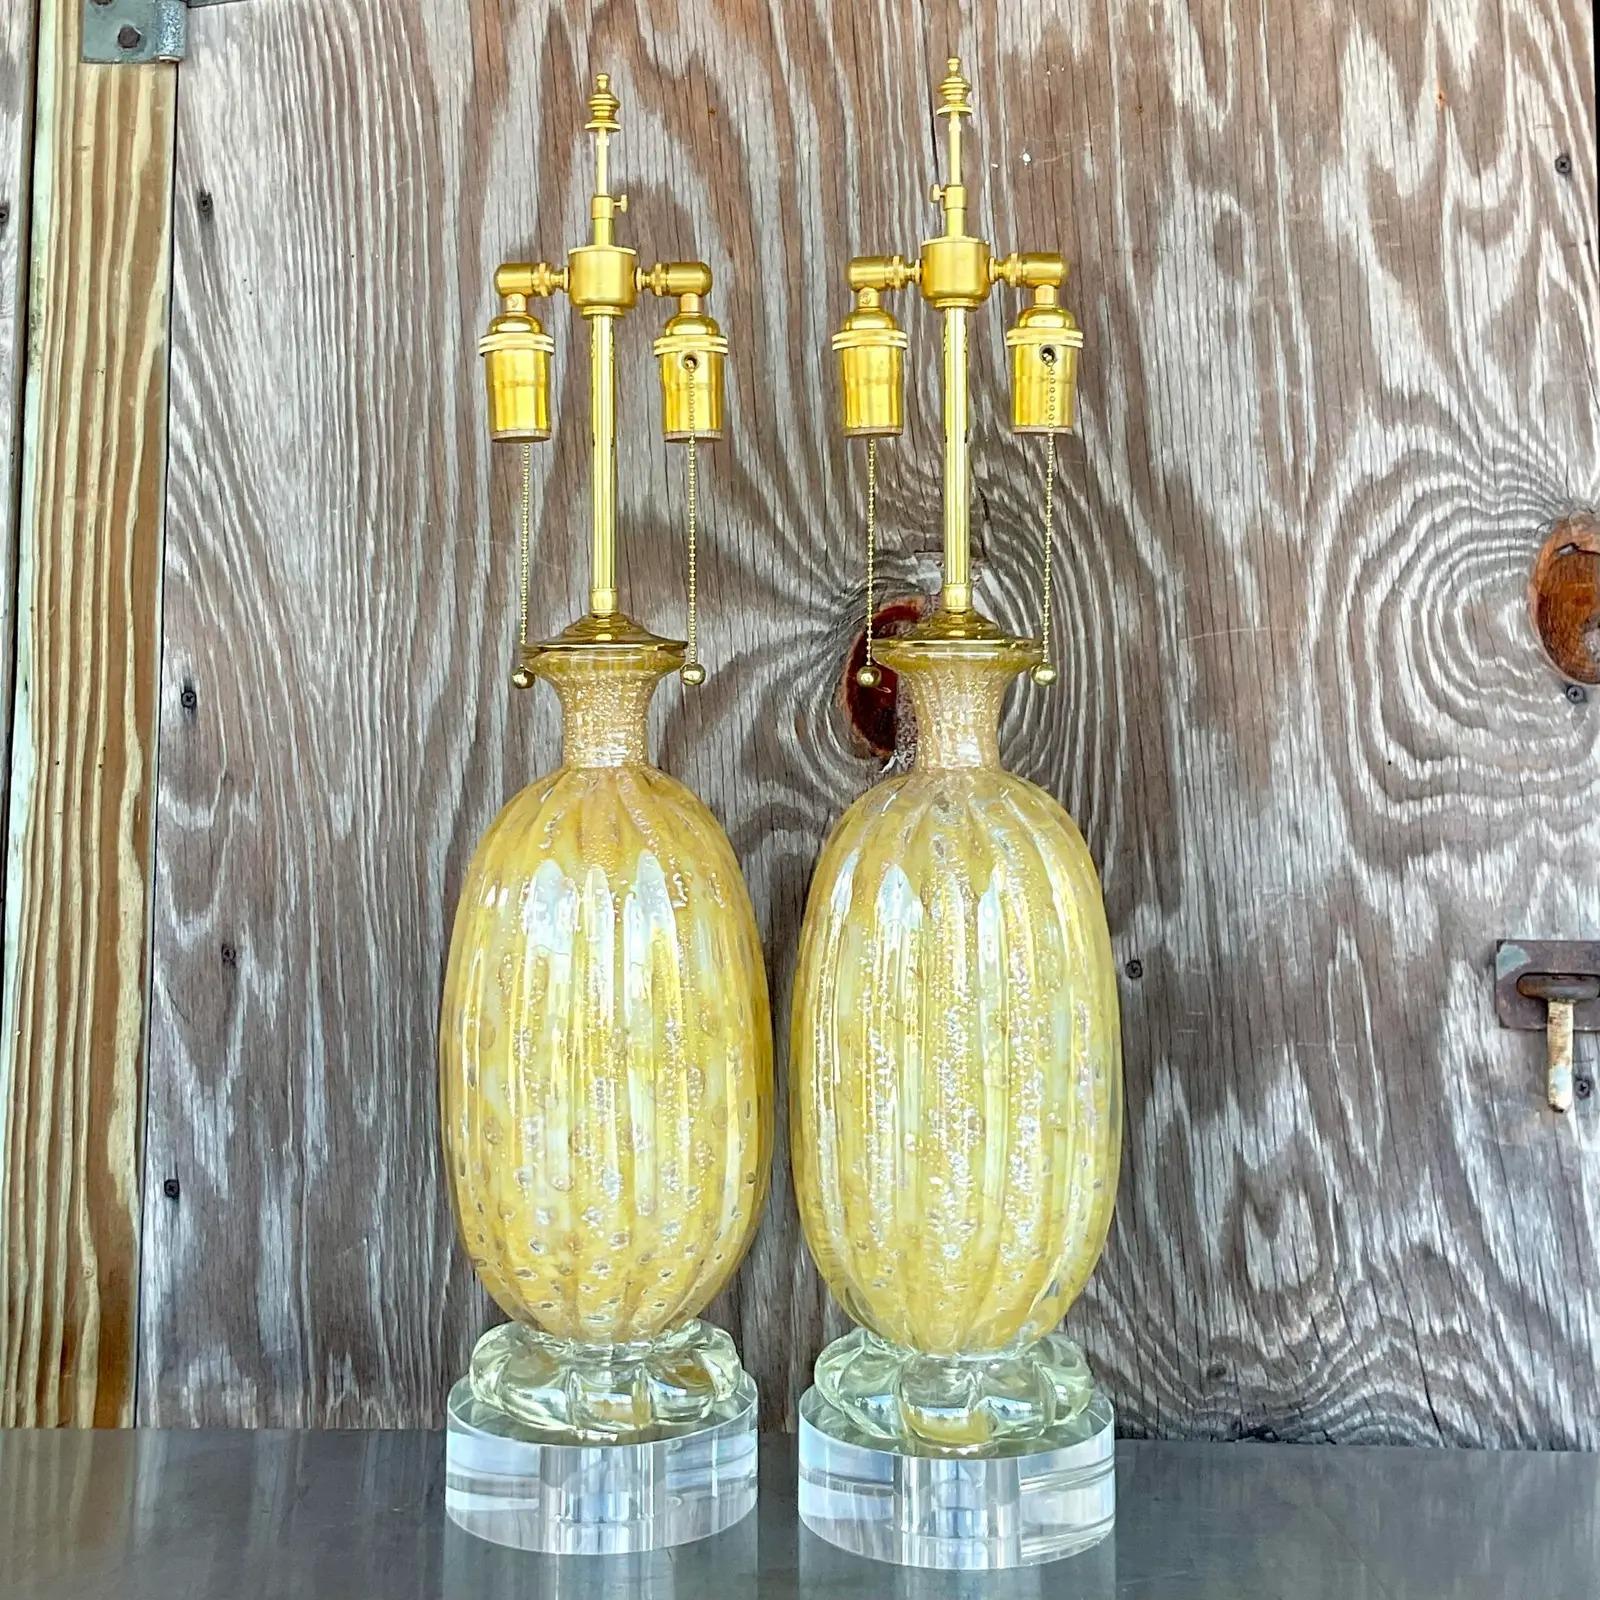 20th Century Vintage Regency Restored Italian Murano Glass Lamps - a Pair For Sale